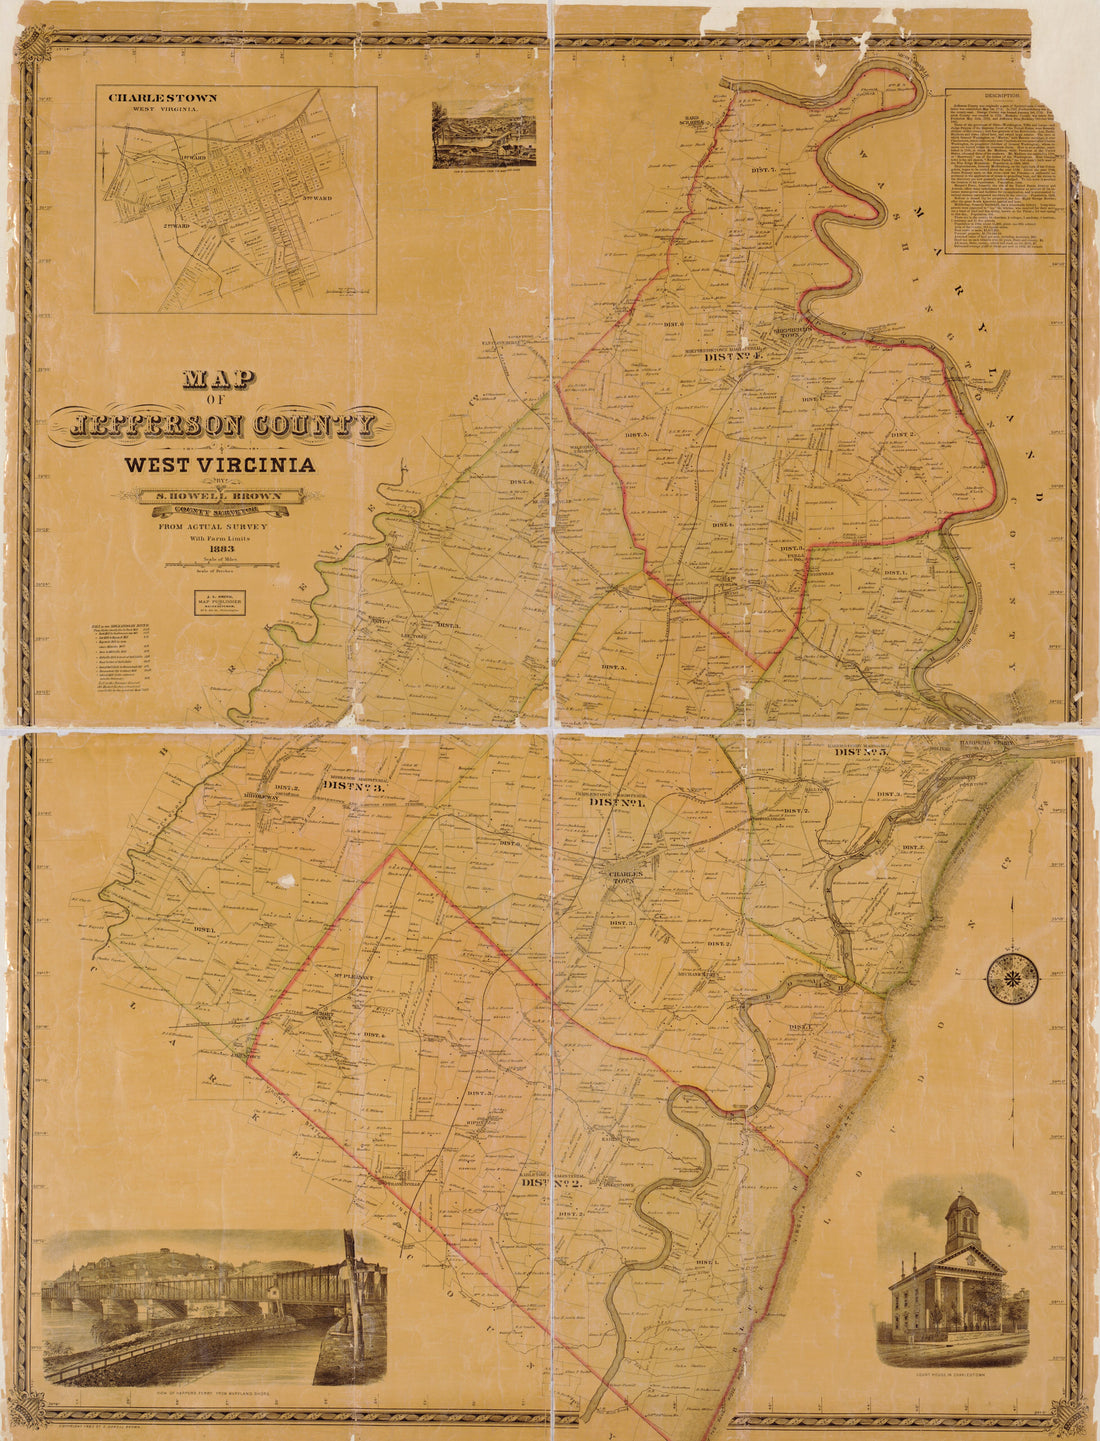 This old map of Map of Jefferson County, West Virginia from 1883 was created by S. Howell Brown in 1883